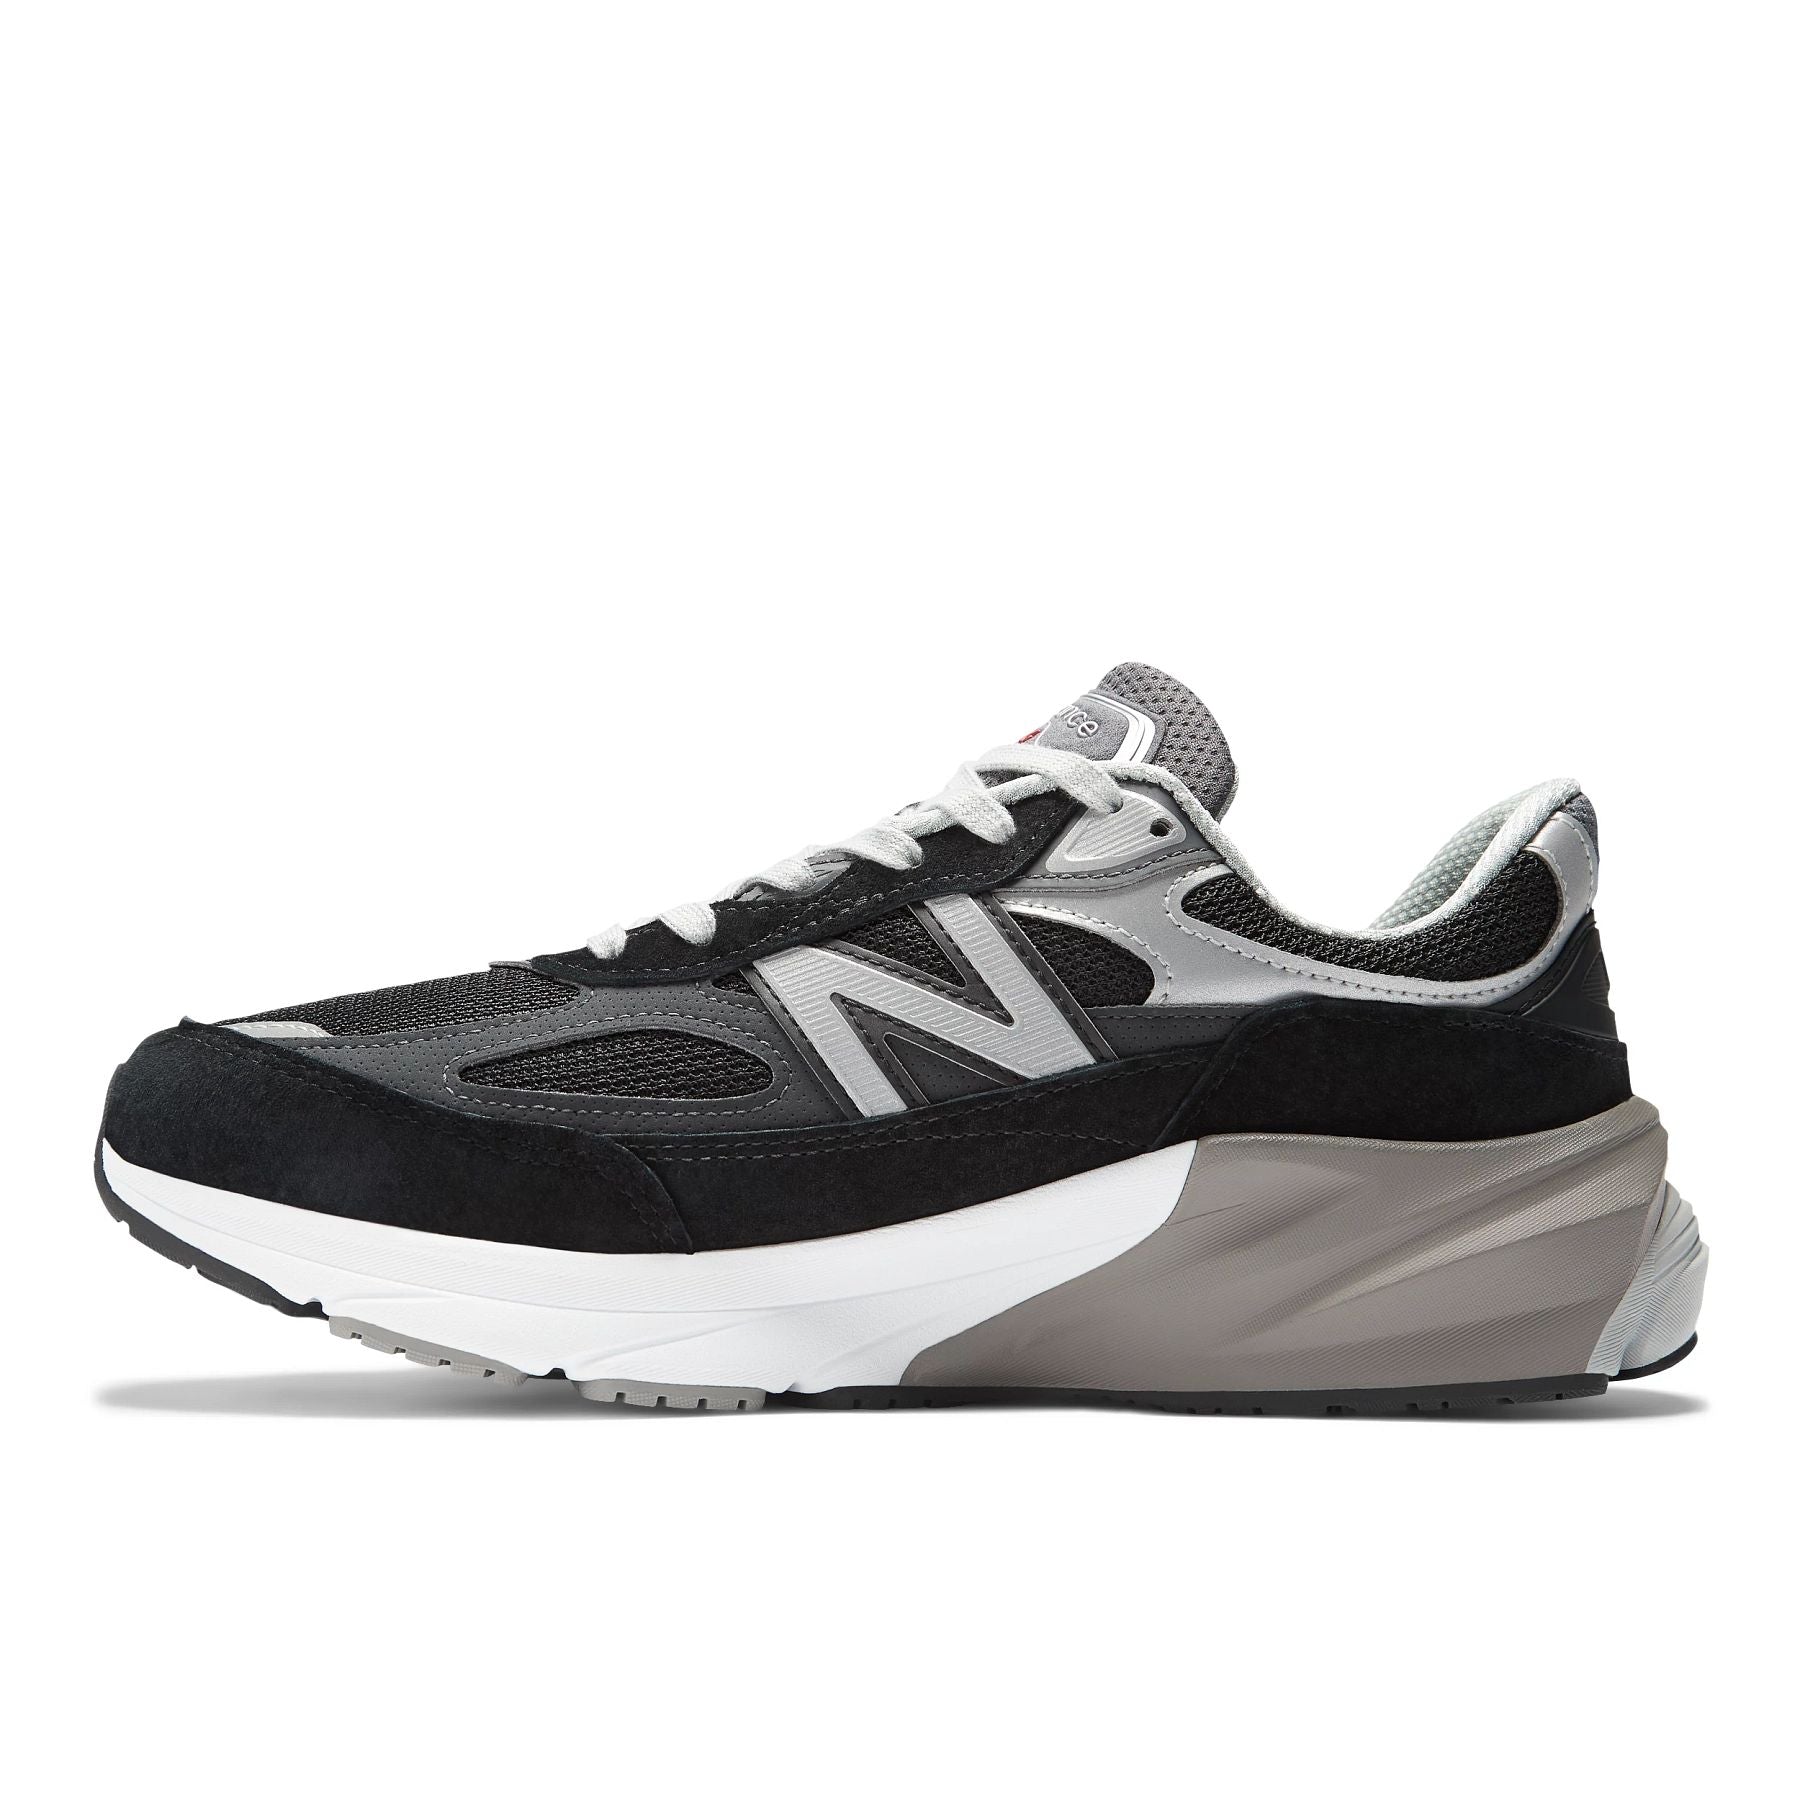 Medial view of the Women's New Balance 990 V6 Lifestyle shoe in Black/White